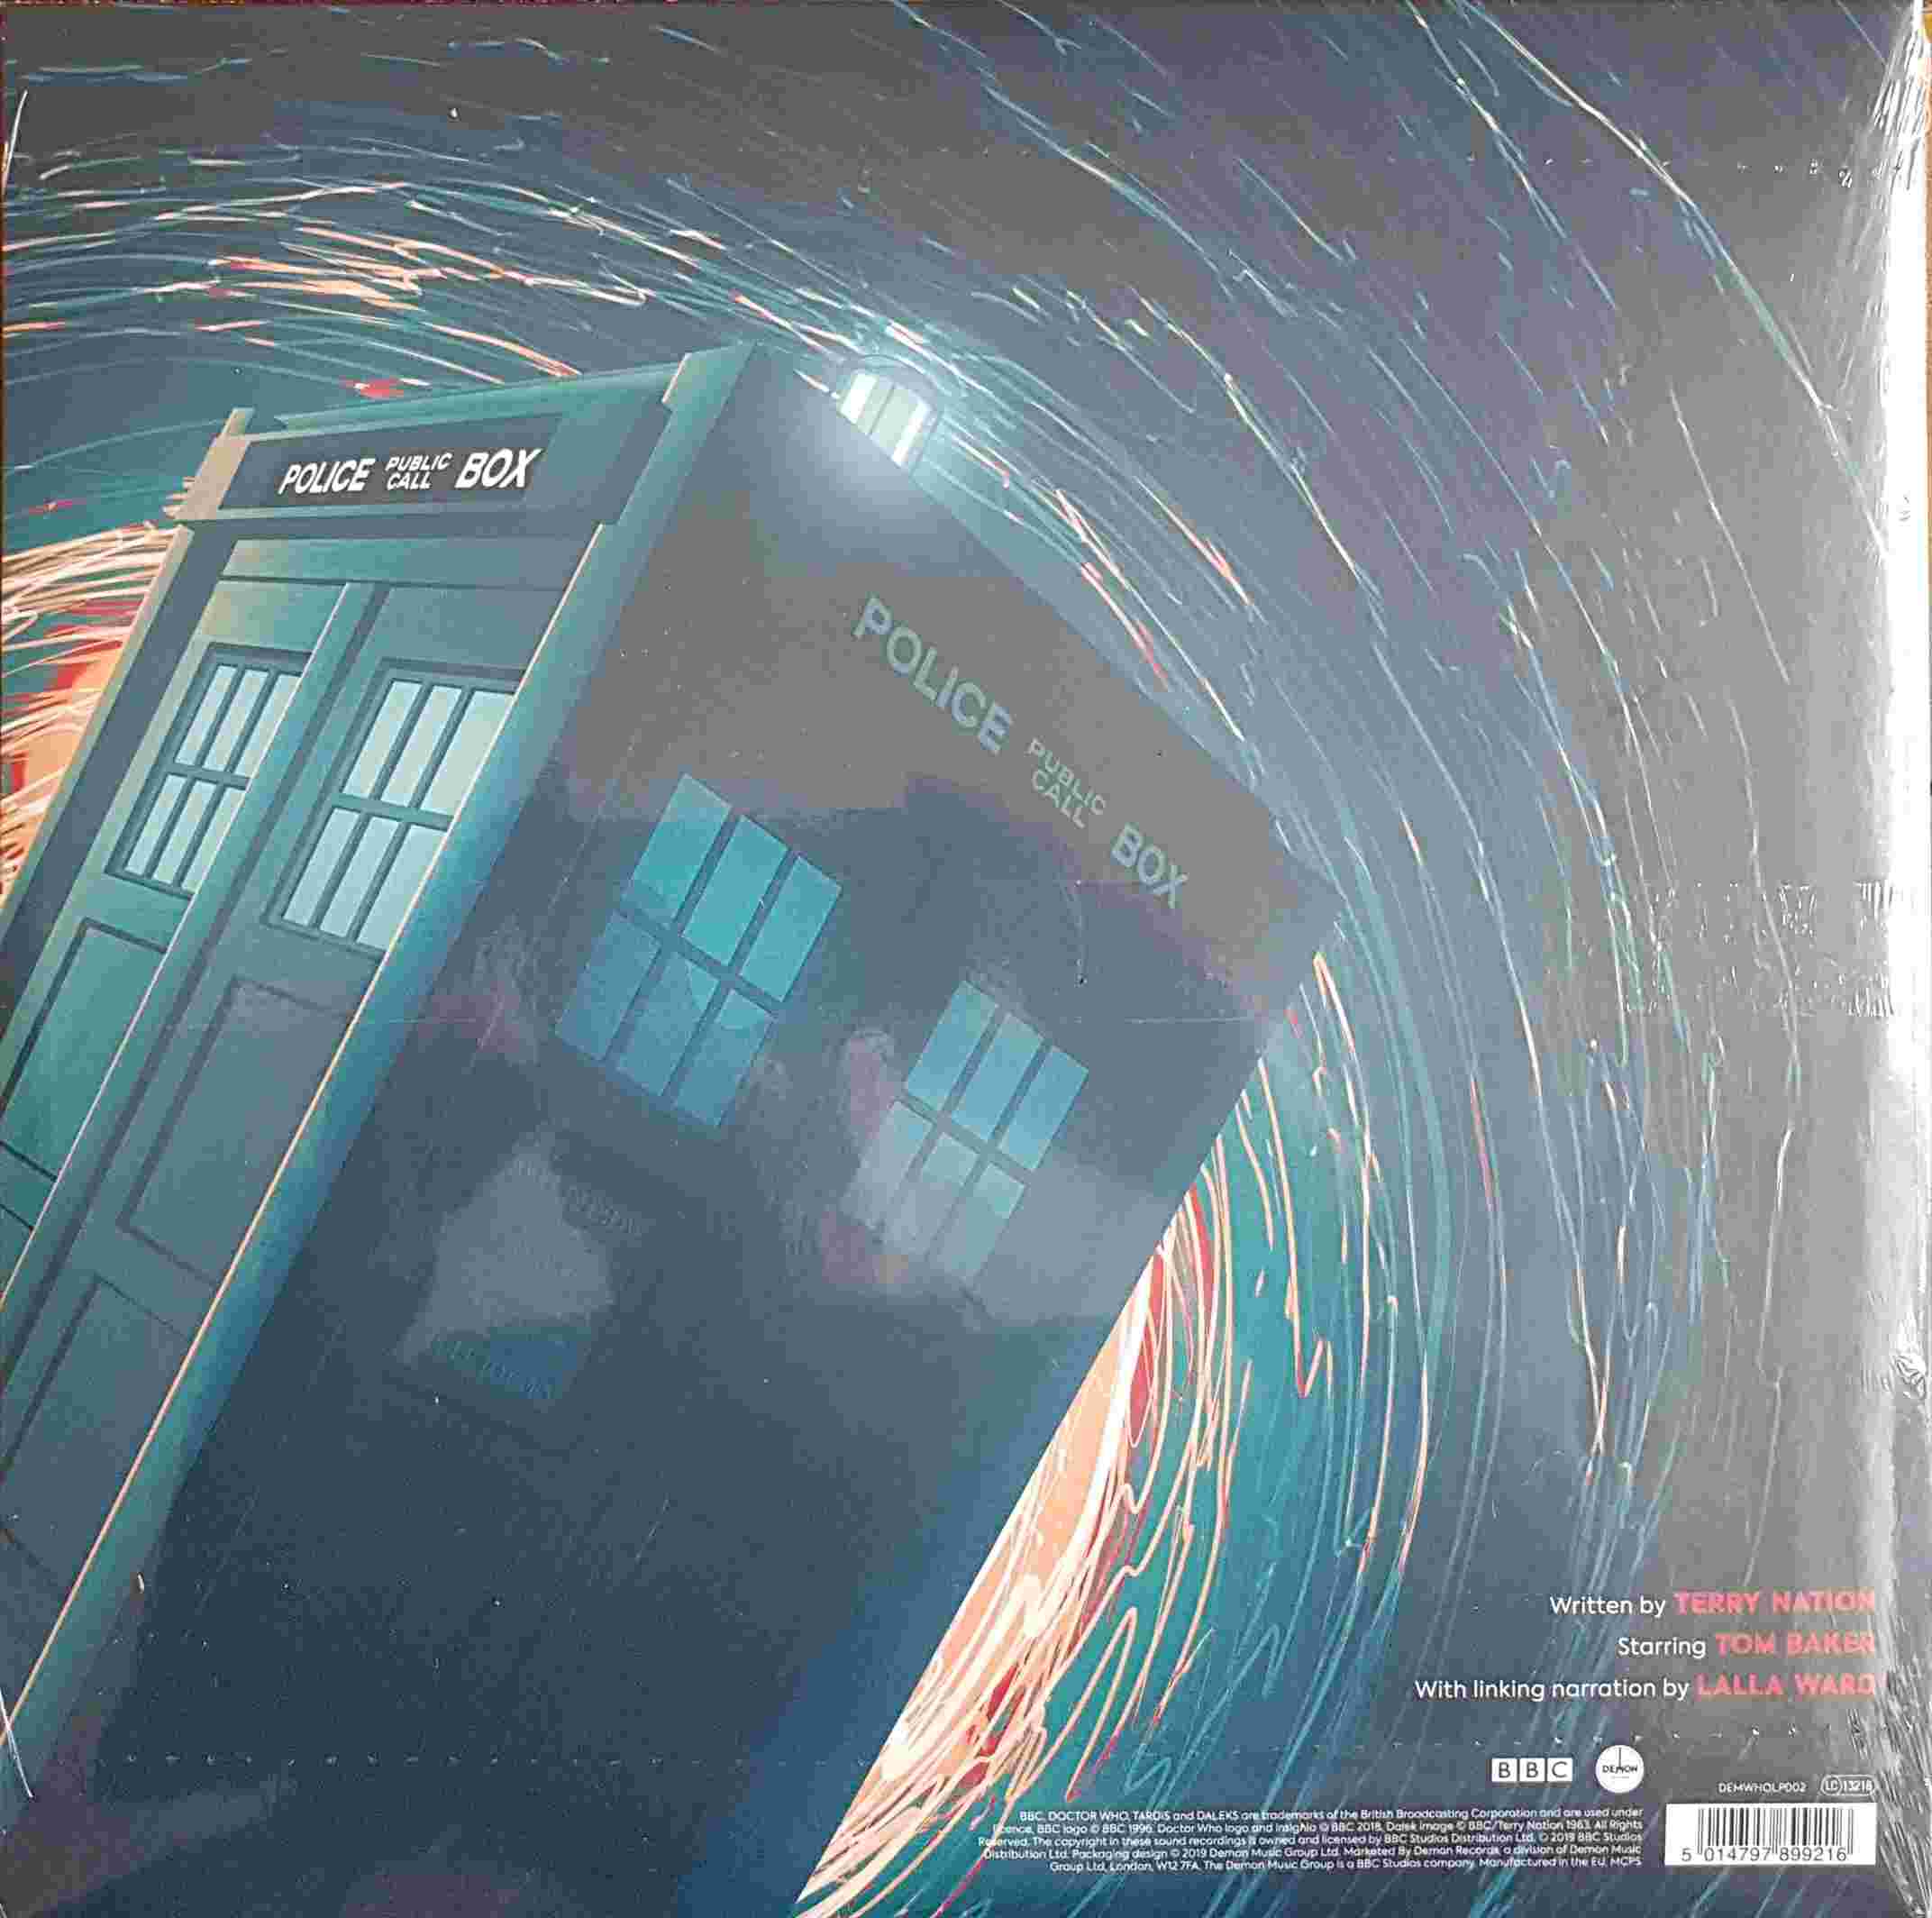 Picture of DEMWHOLP002 Doctor Who - Destiny of the Daleks - Record Store Day 2019 by artist Terry Nation from the BBC records and Tapes library